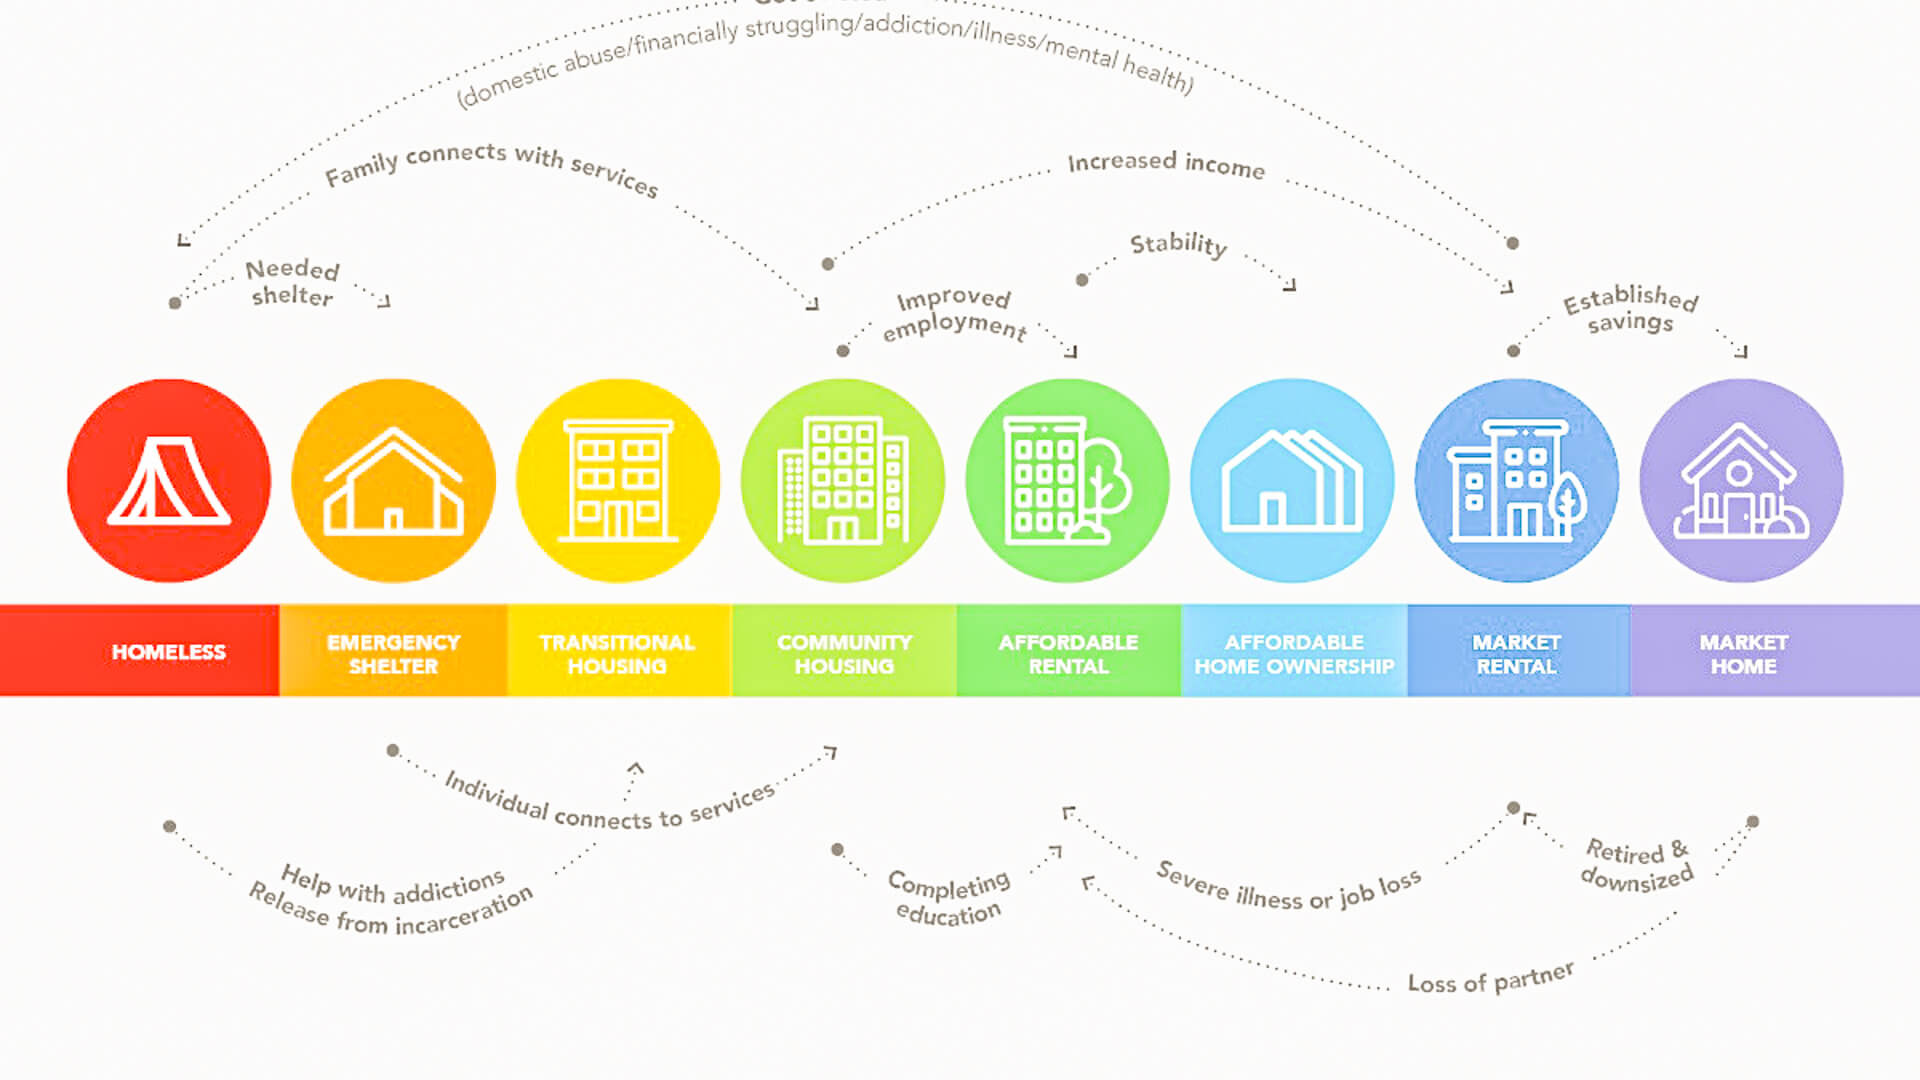 A graphic demonstrating the housing continuum - an image that explains the range of housing options in a community.